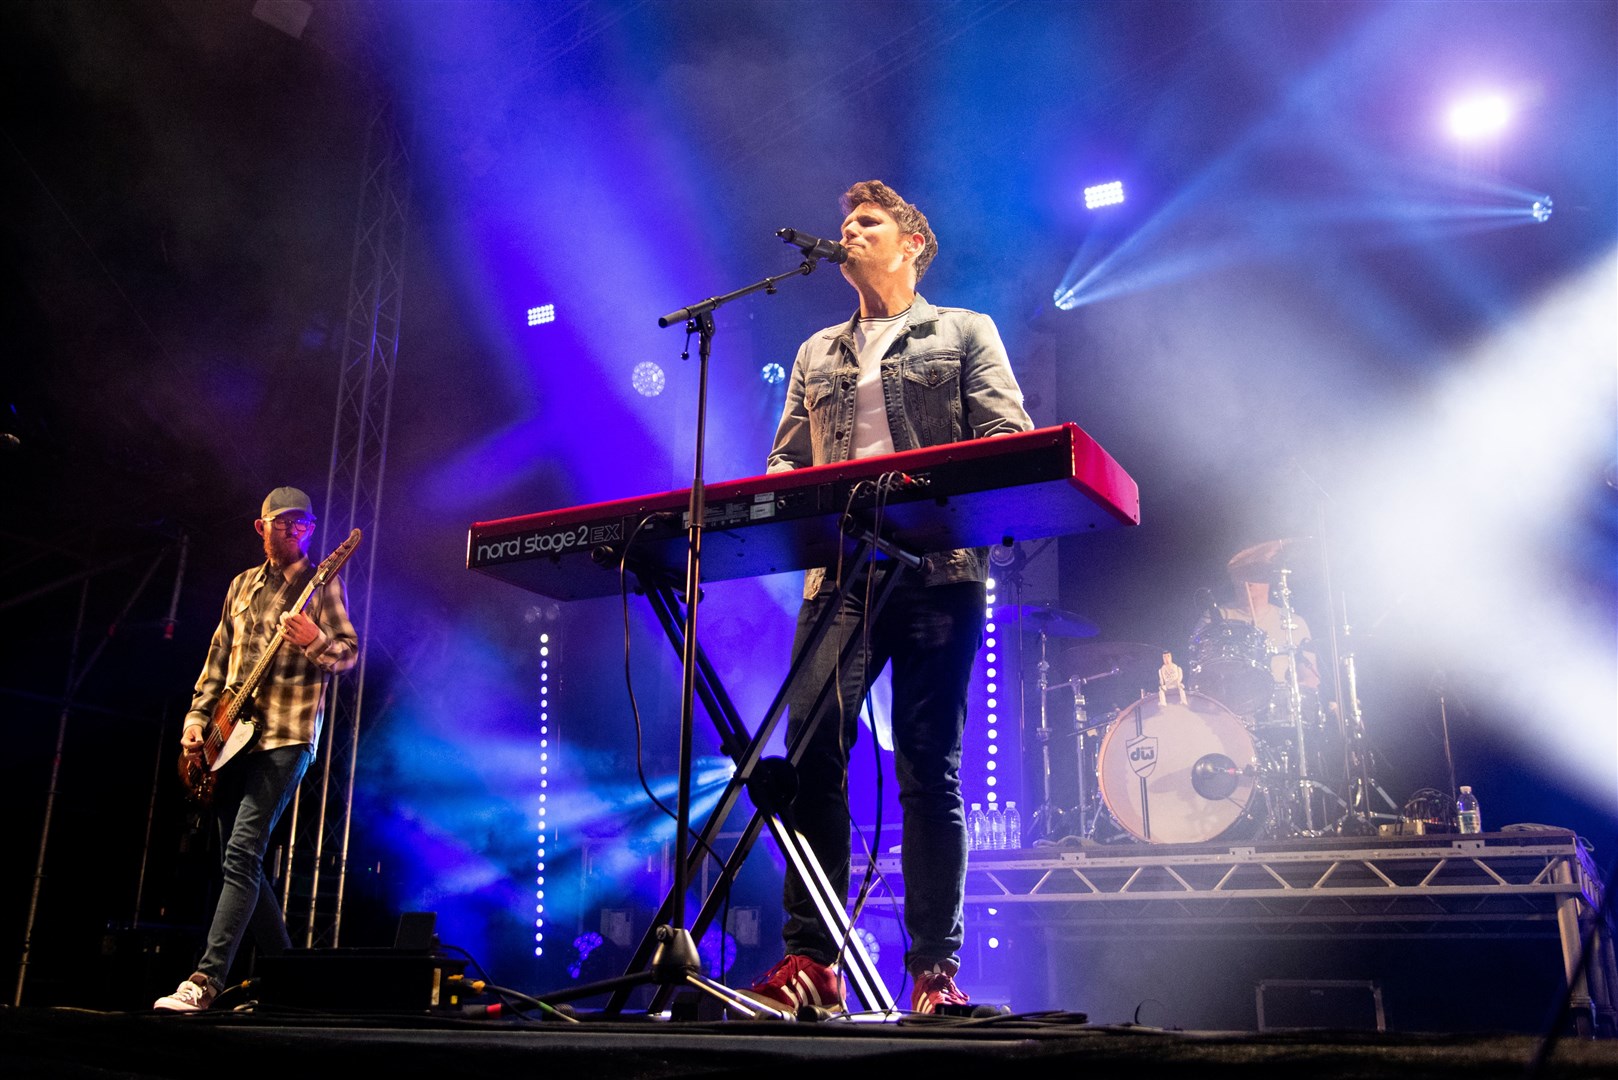 Closing the main stage on the Sunday night of the festival was Scouting for Girls. Picture: Daniel Forsyth.